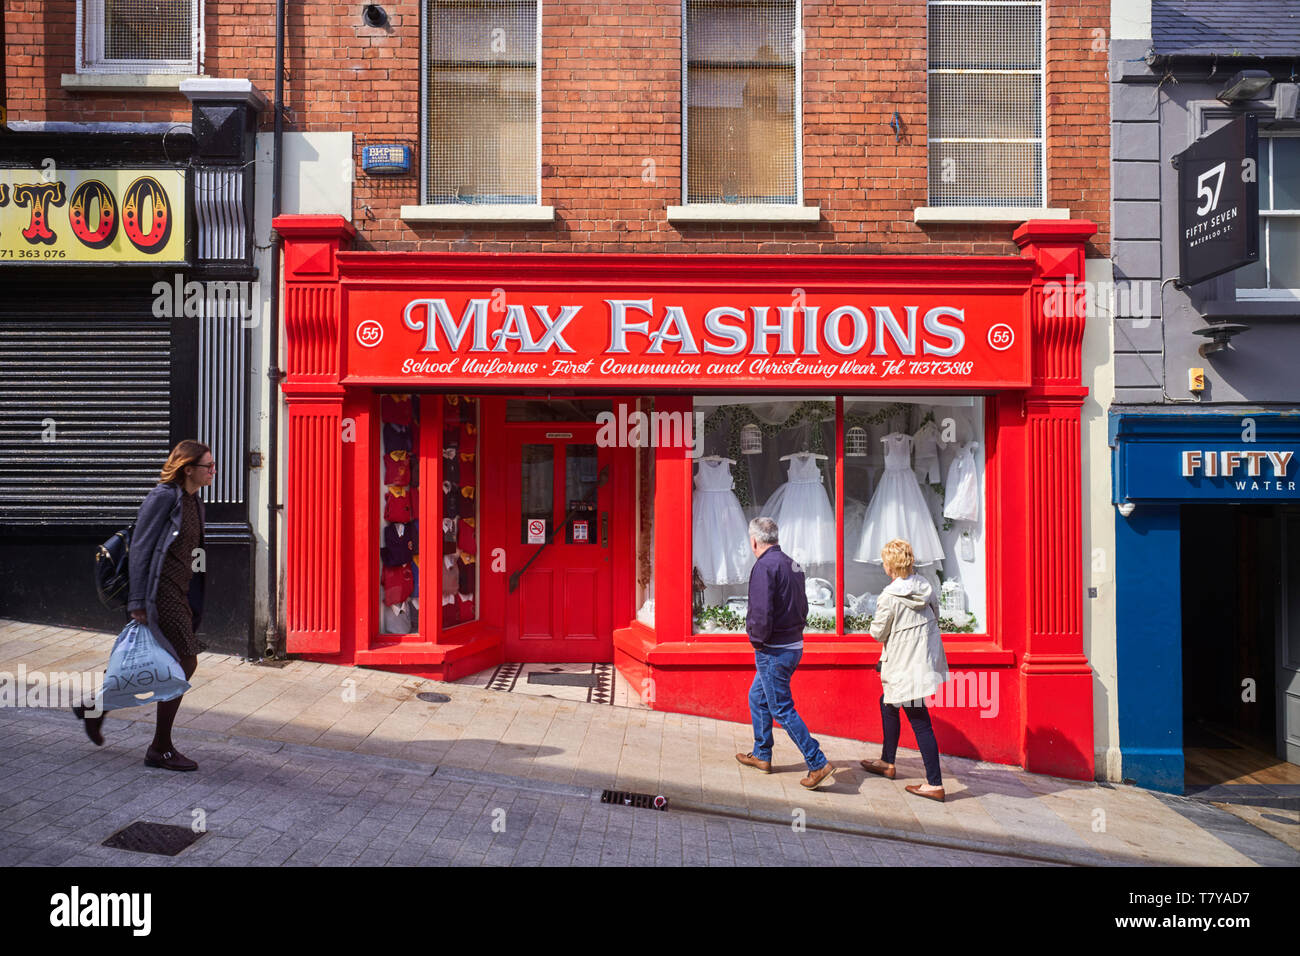 Max Fashions shop for school uniforms and first communion wear in Waterloo Street, Londonderry, Northern Ireland Stock Photo